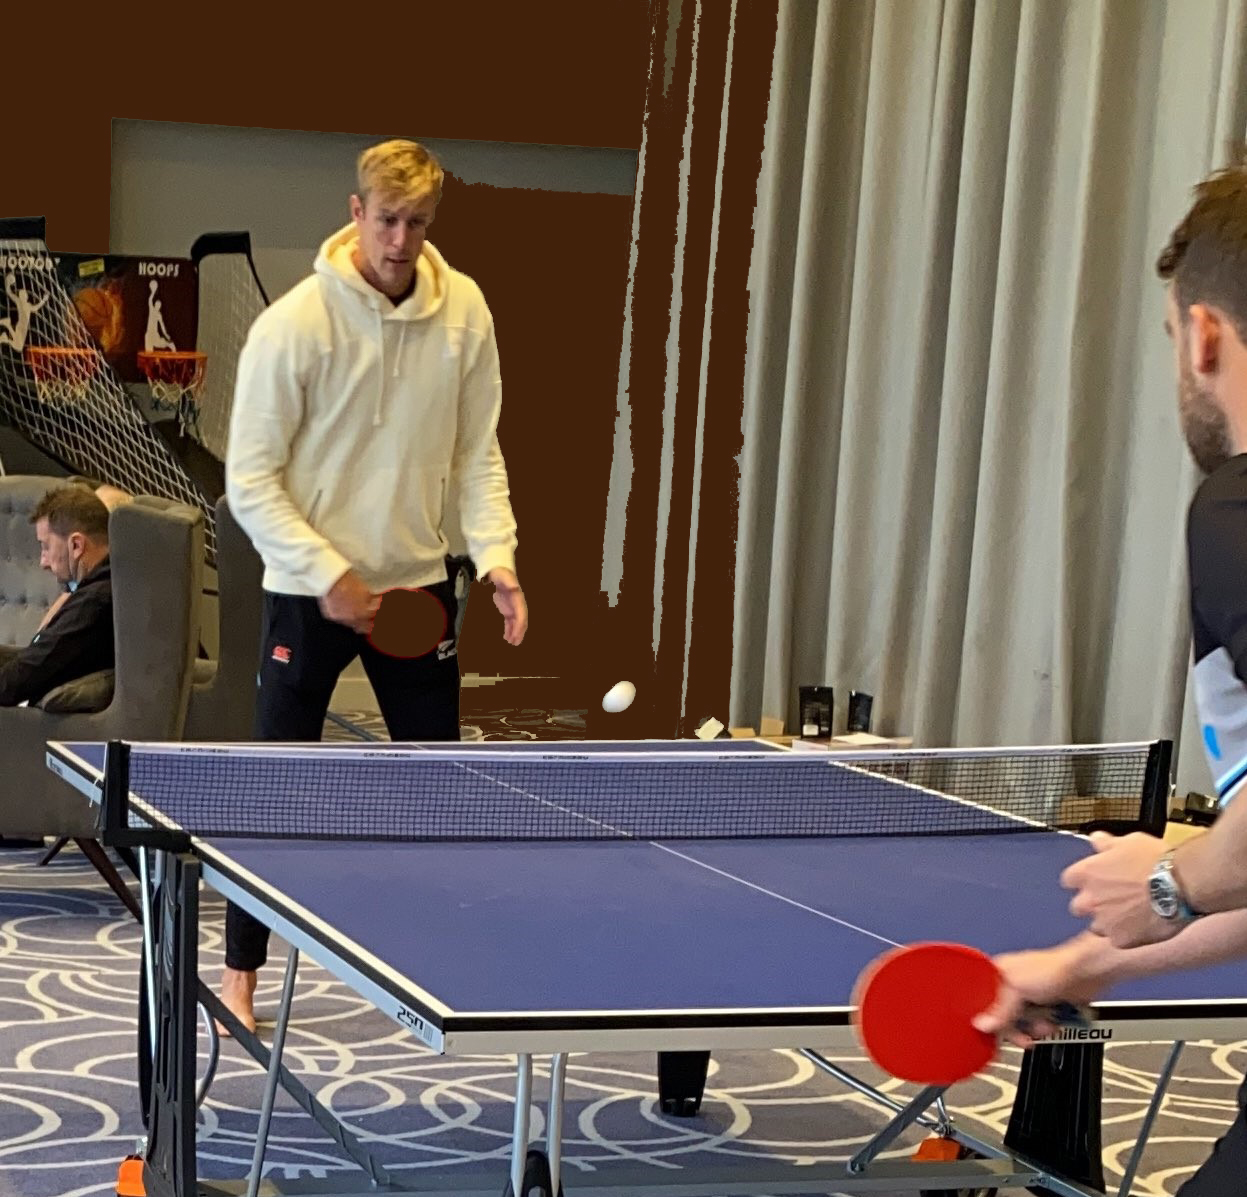 WTC Final 2021: Kyle Jamieson Plays Table Tennis As Rain Delays Start Of Play On Day 4